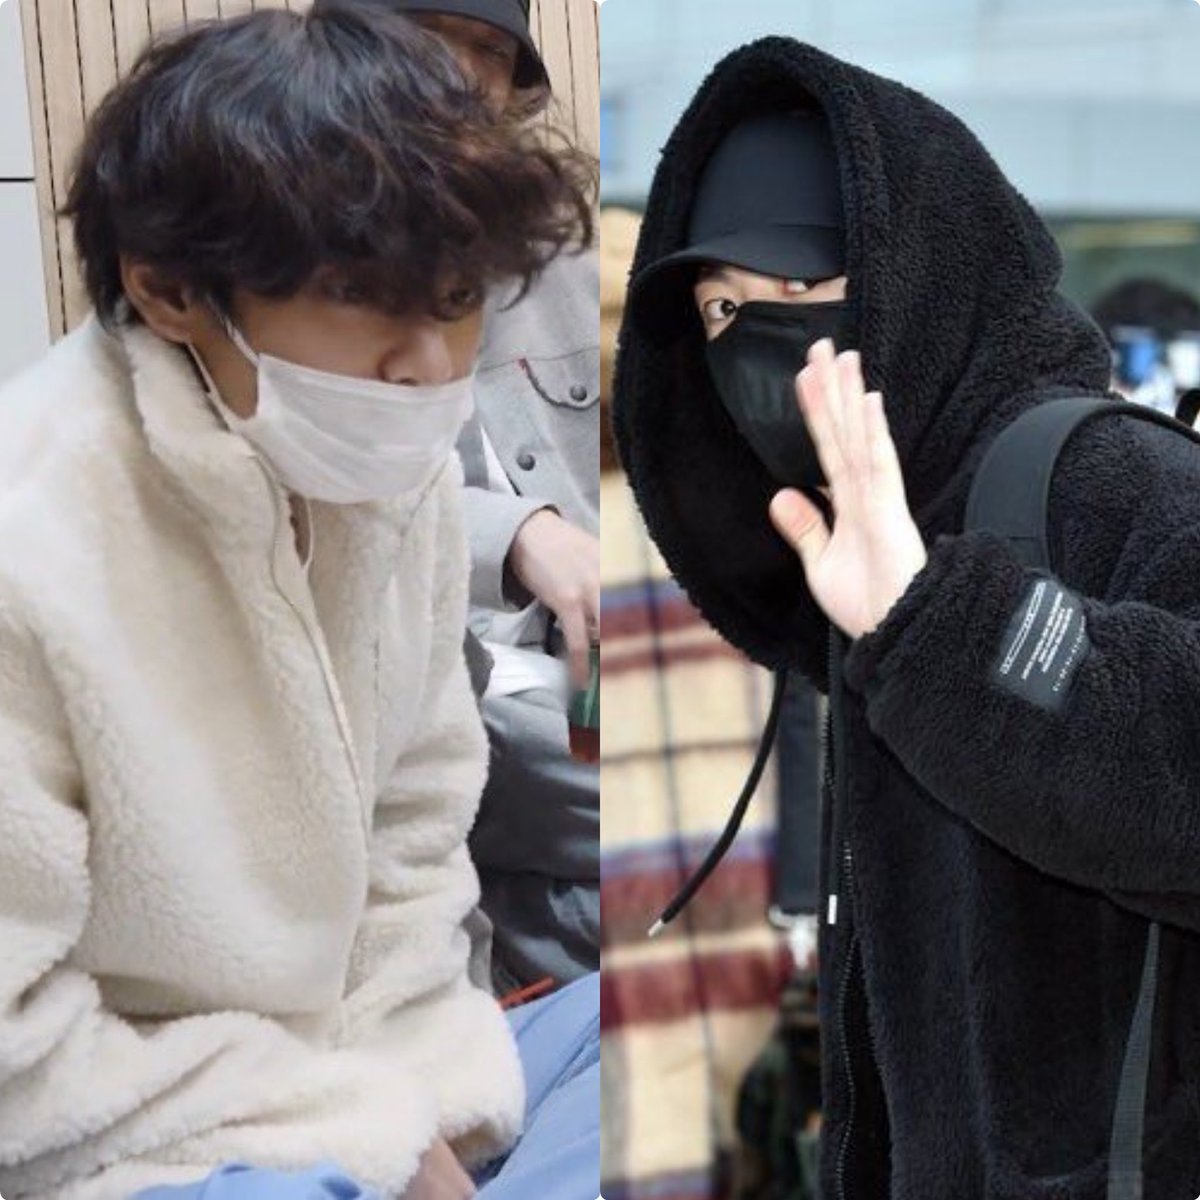 TAEKOOK having similar style or design of clothes in different color is really cute